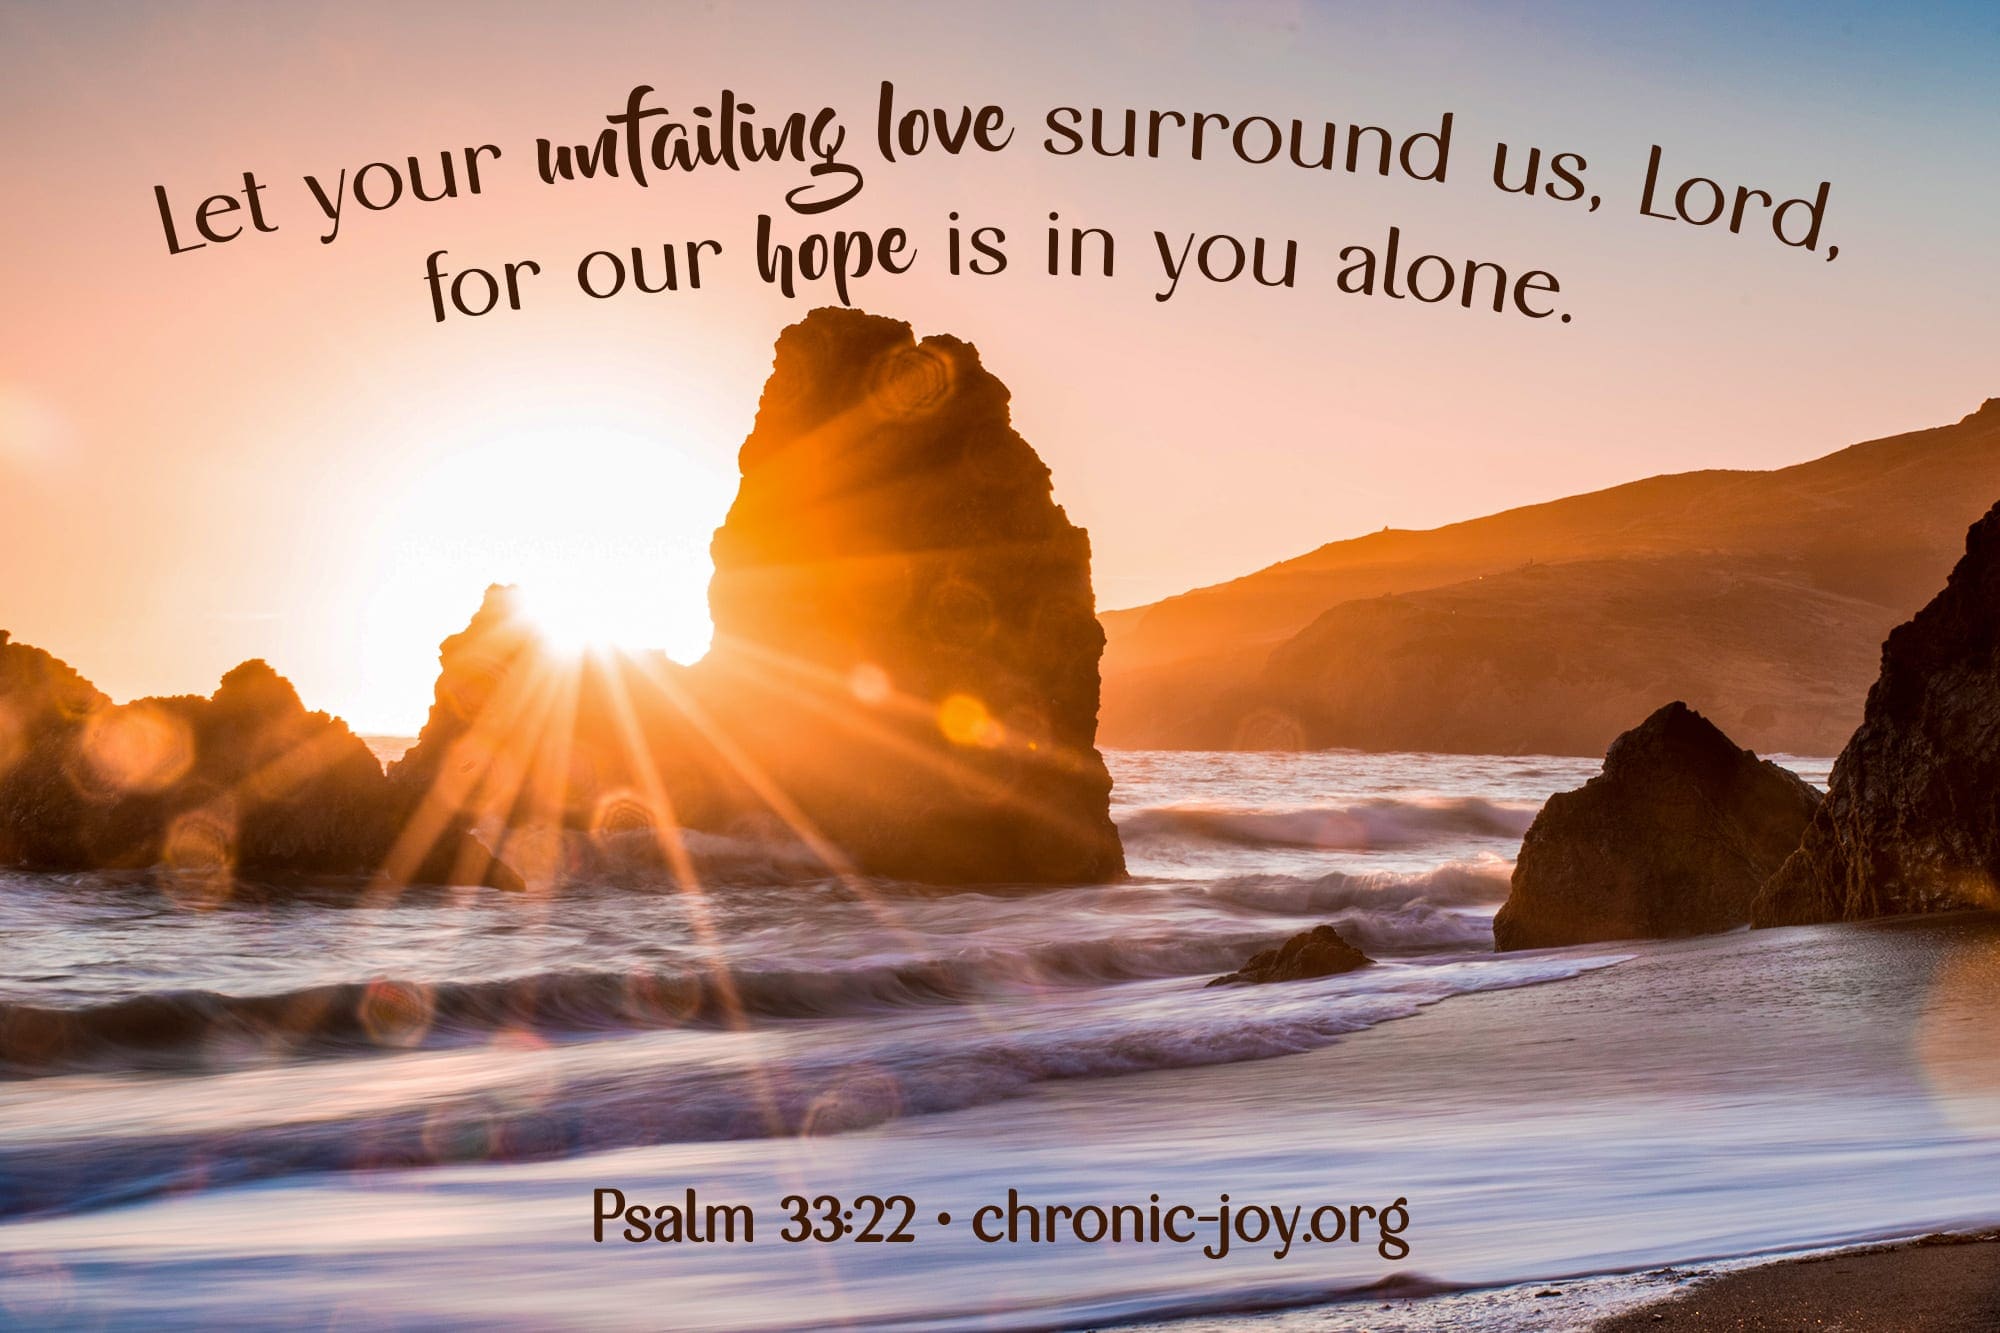 "Let your unfailing love surround us, Lord, for our hope is in you alone." Psalm 33:22